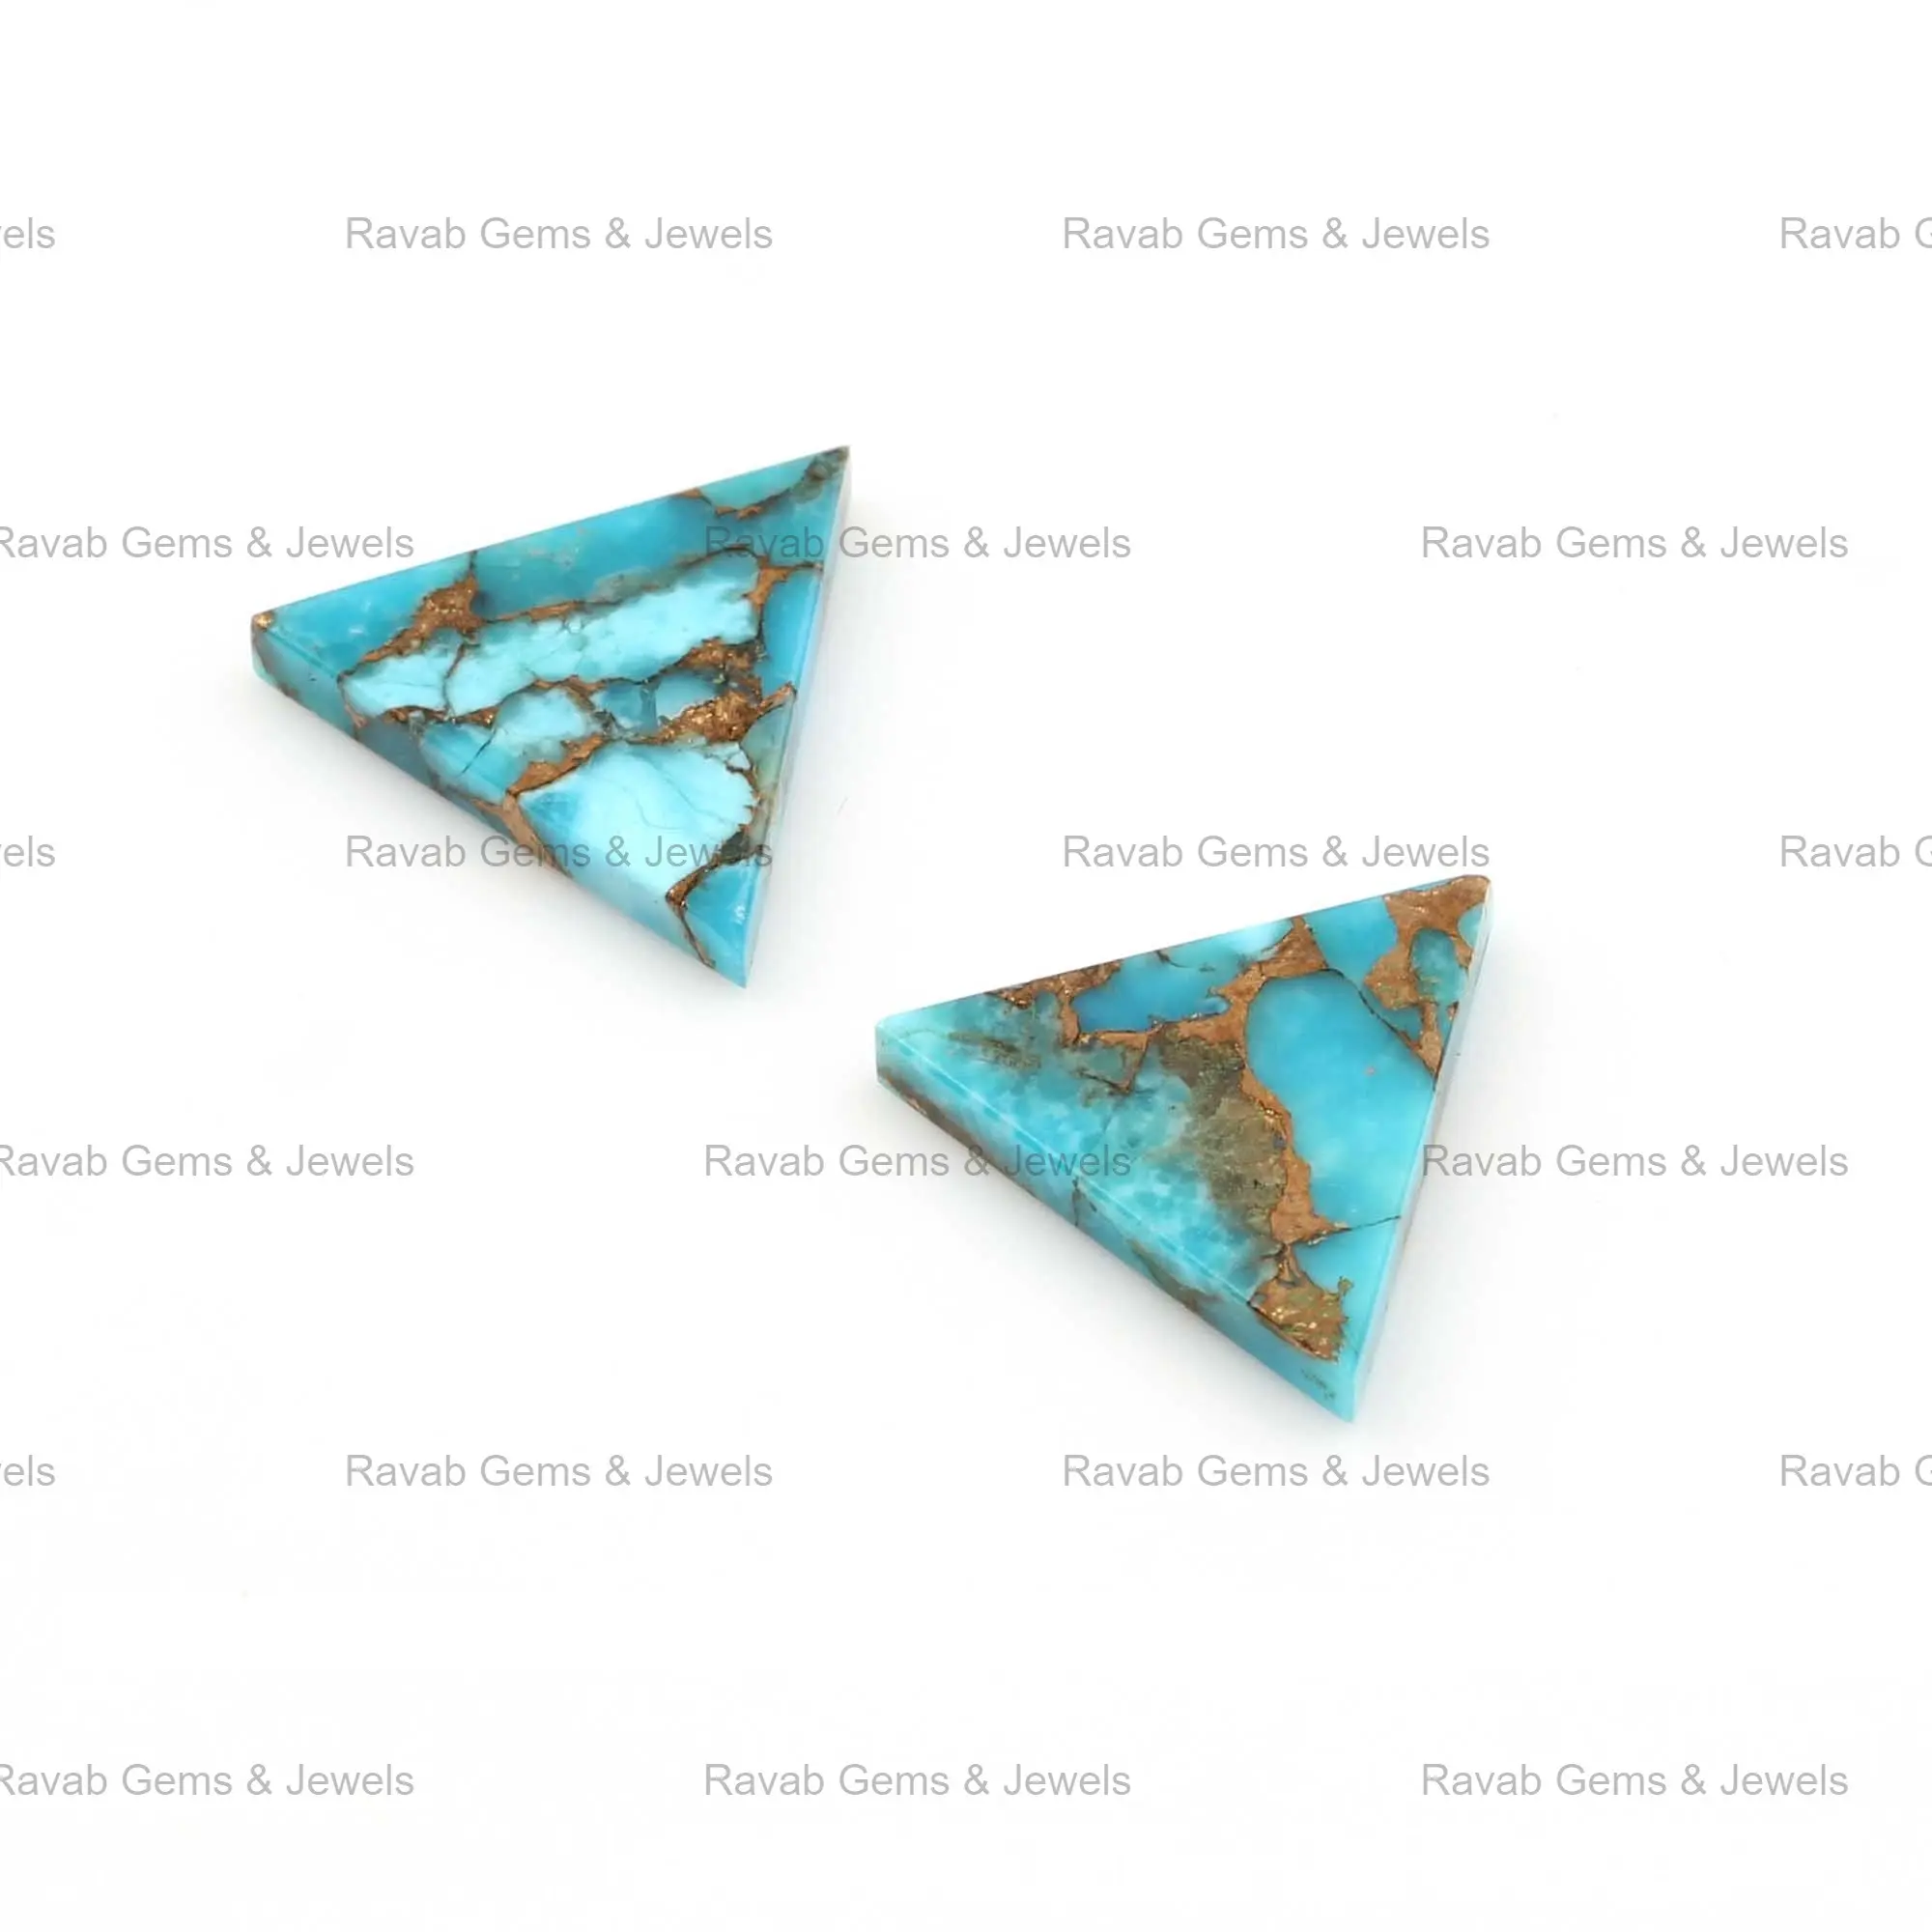 12mm Flat Triangle Shape Natural Mohave Kingman Blue Copper Turquoise Gemstone Jewelry Making Calibrated Loose Stones